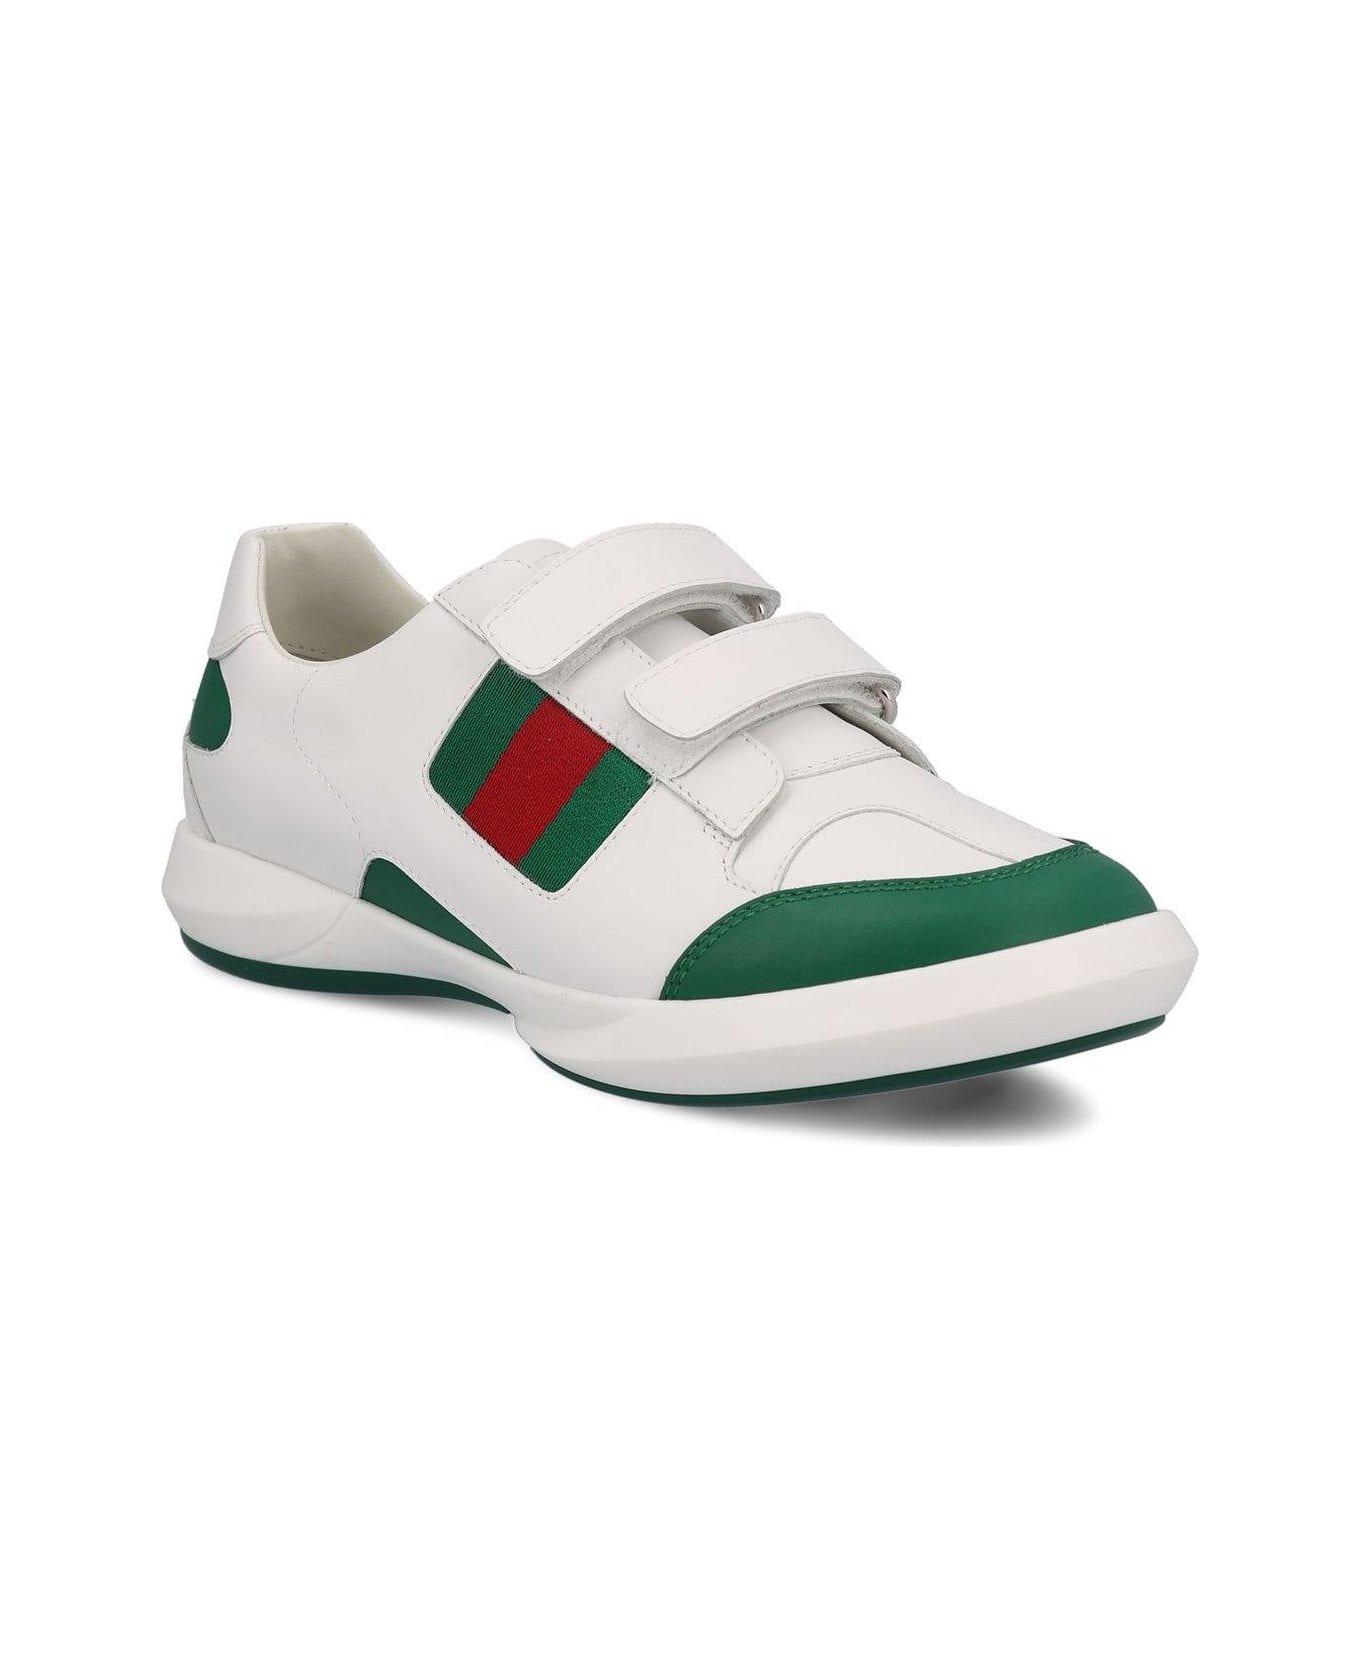 Gucci Logo Printed Round Toe Sneakers - White